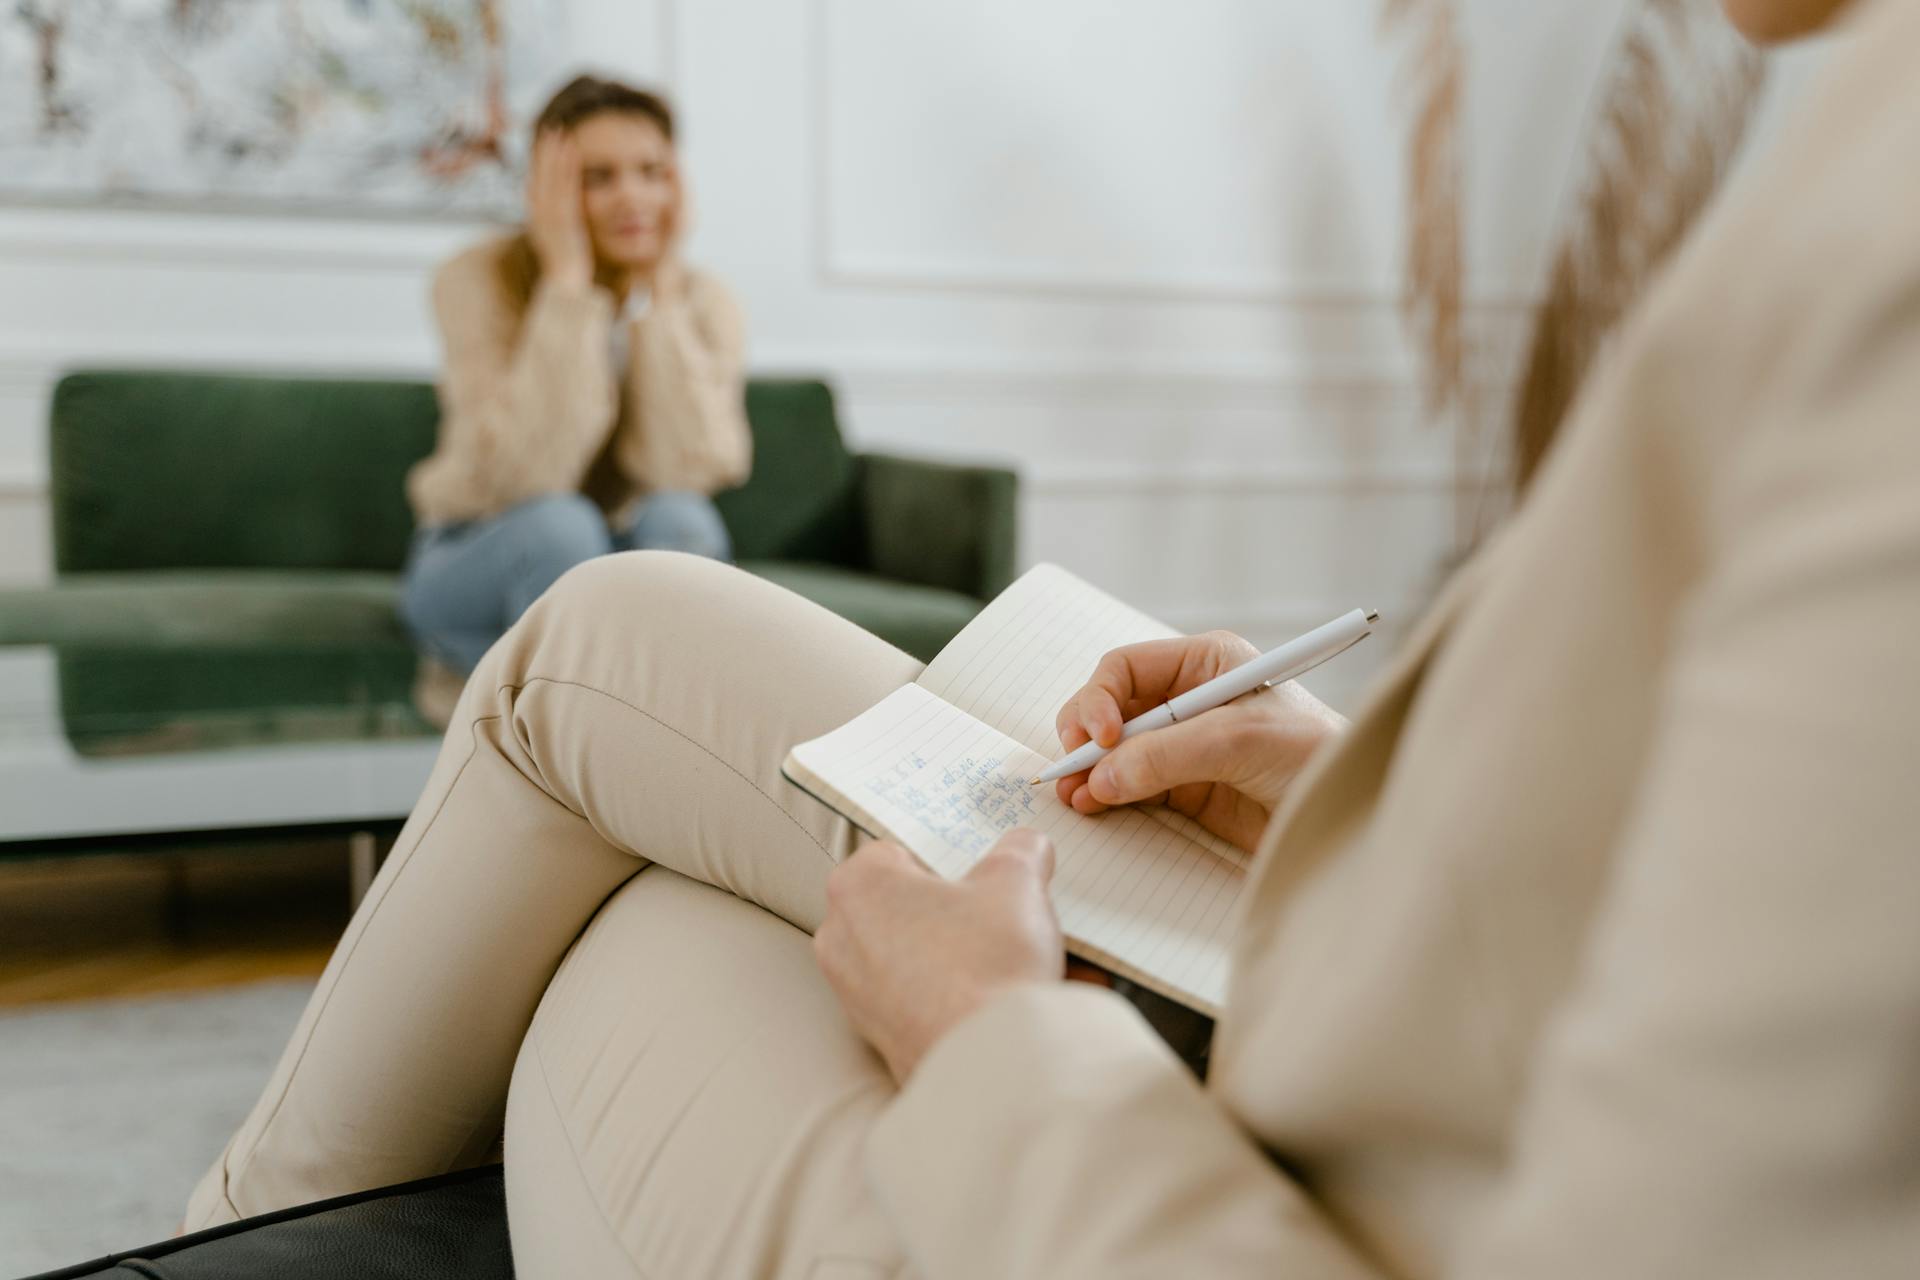 A therapist taking notes | Source: Pexels